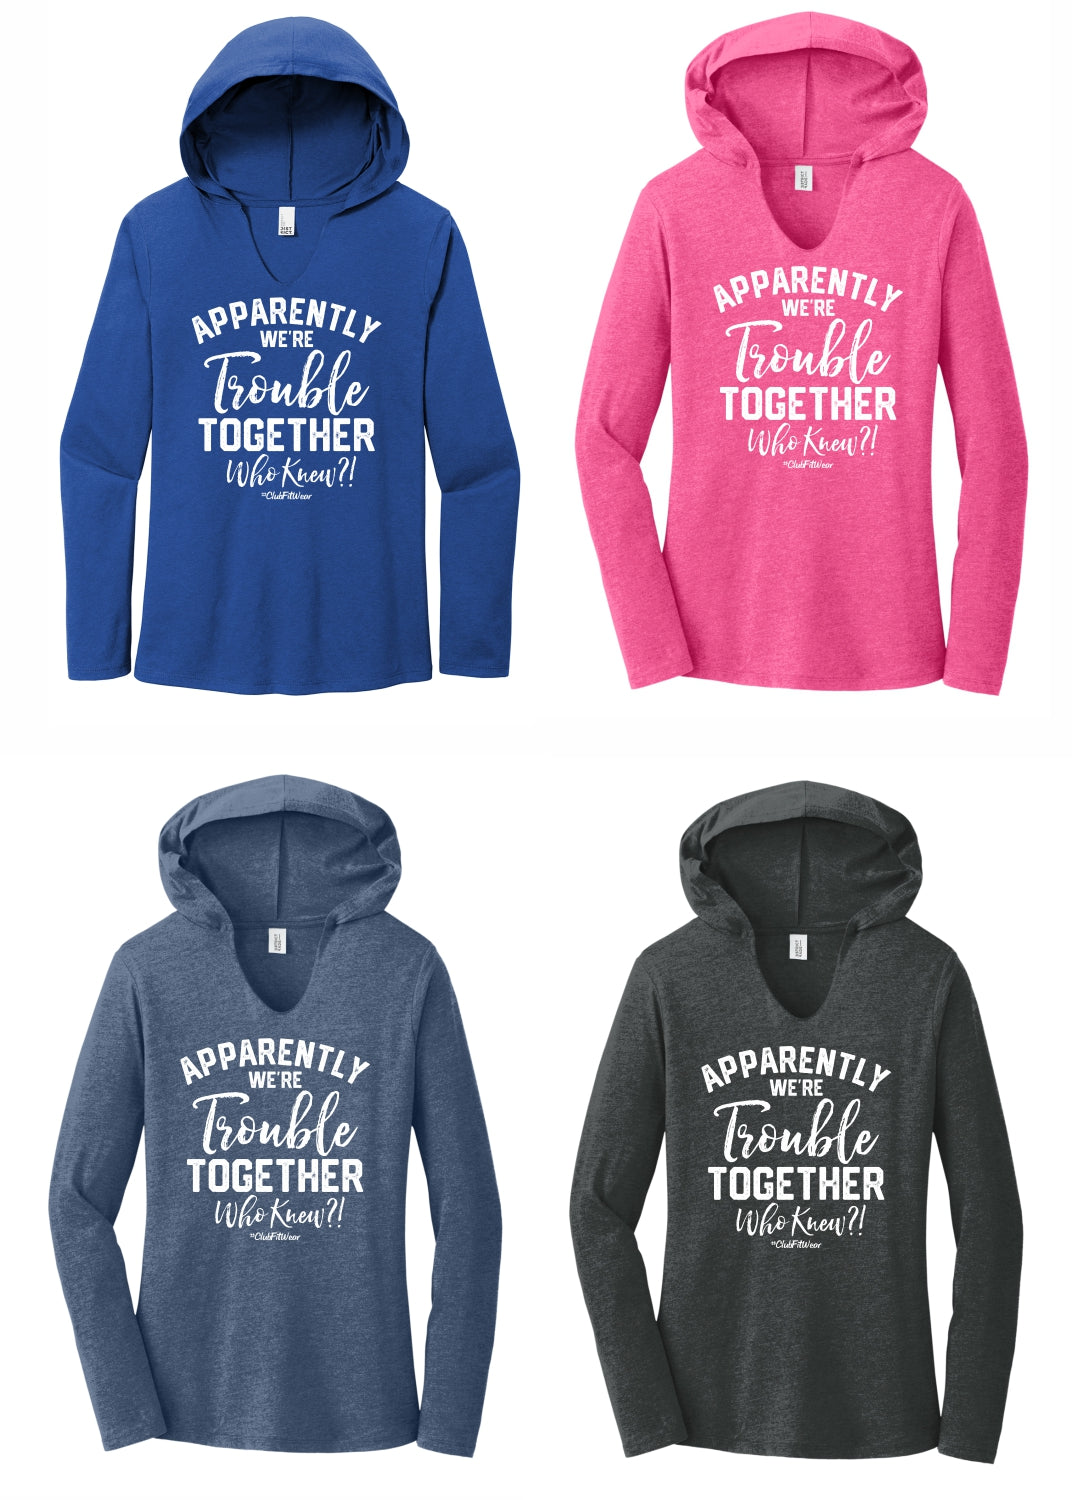 Apparently we're Trouble Together Who Knew?! - Women's V-Neck Hooded Pullover